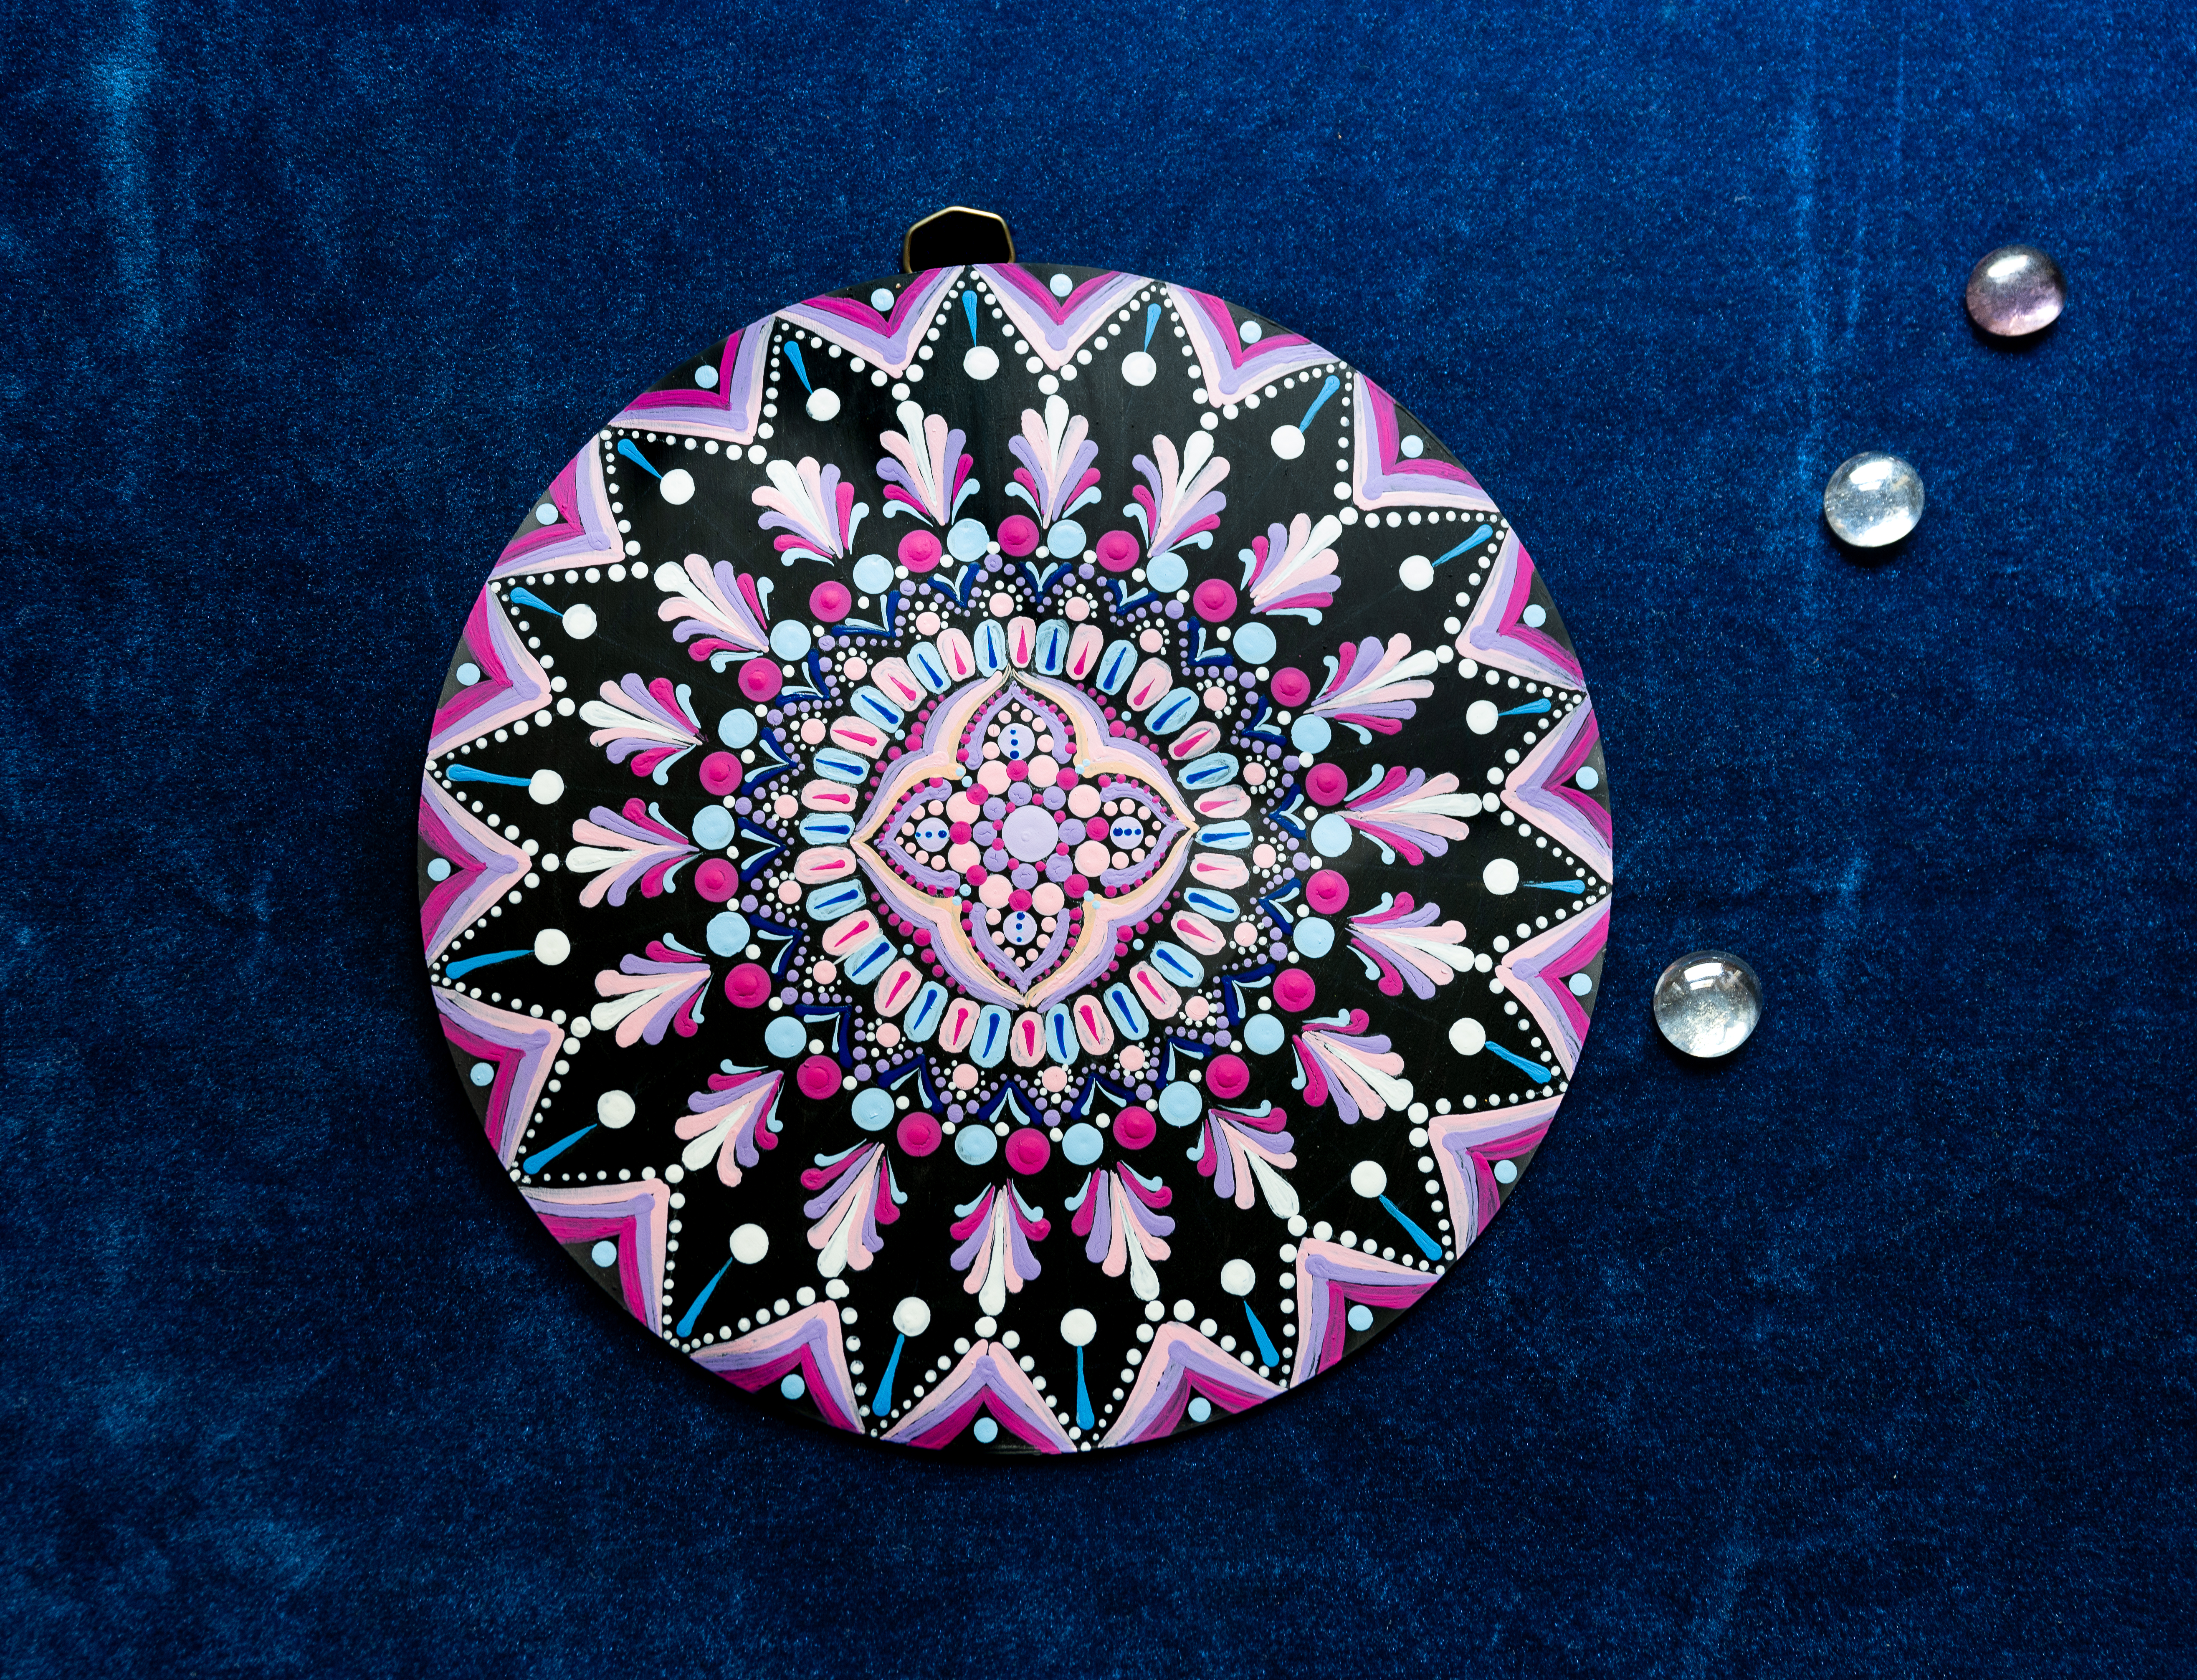 Garden Paradise Mandala in soft shades of pink and blue